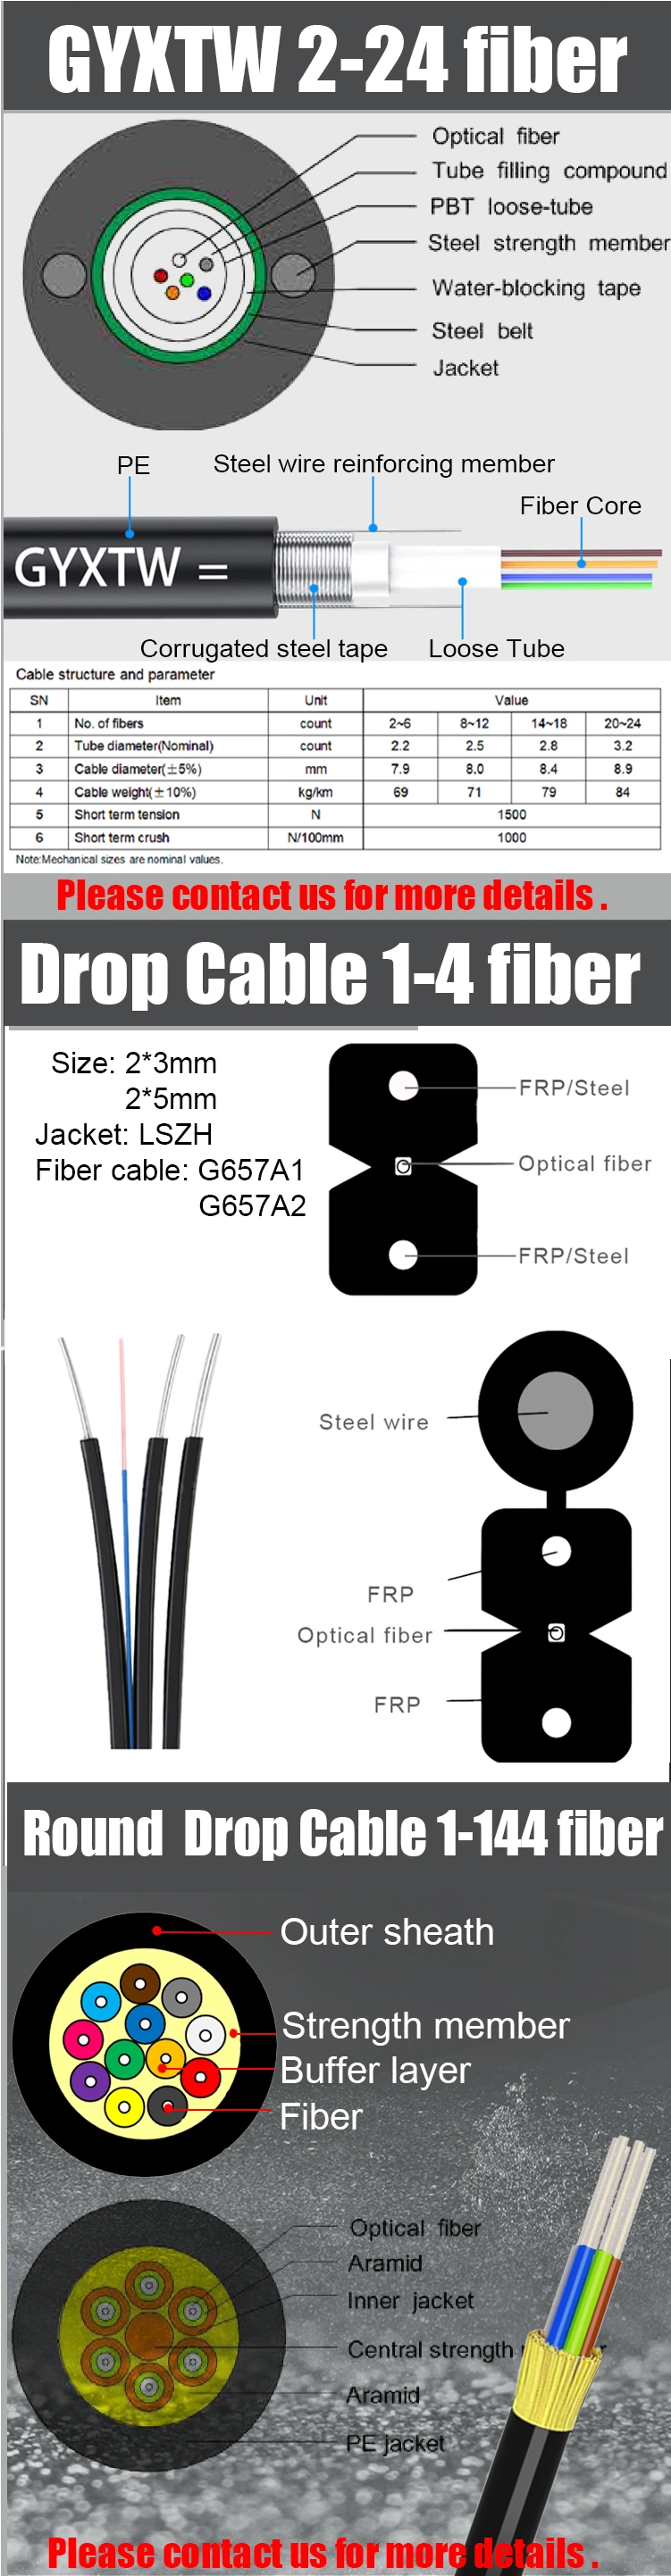 Gcabling Fiber Optic Single Mode Multimode ADSS GYXTW GYTS Outdoor Cable